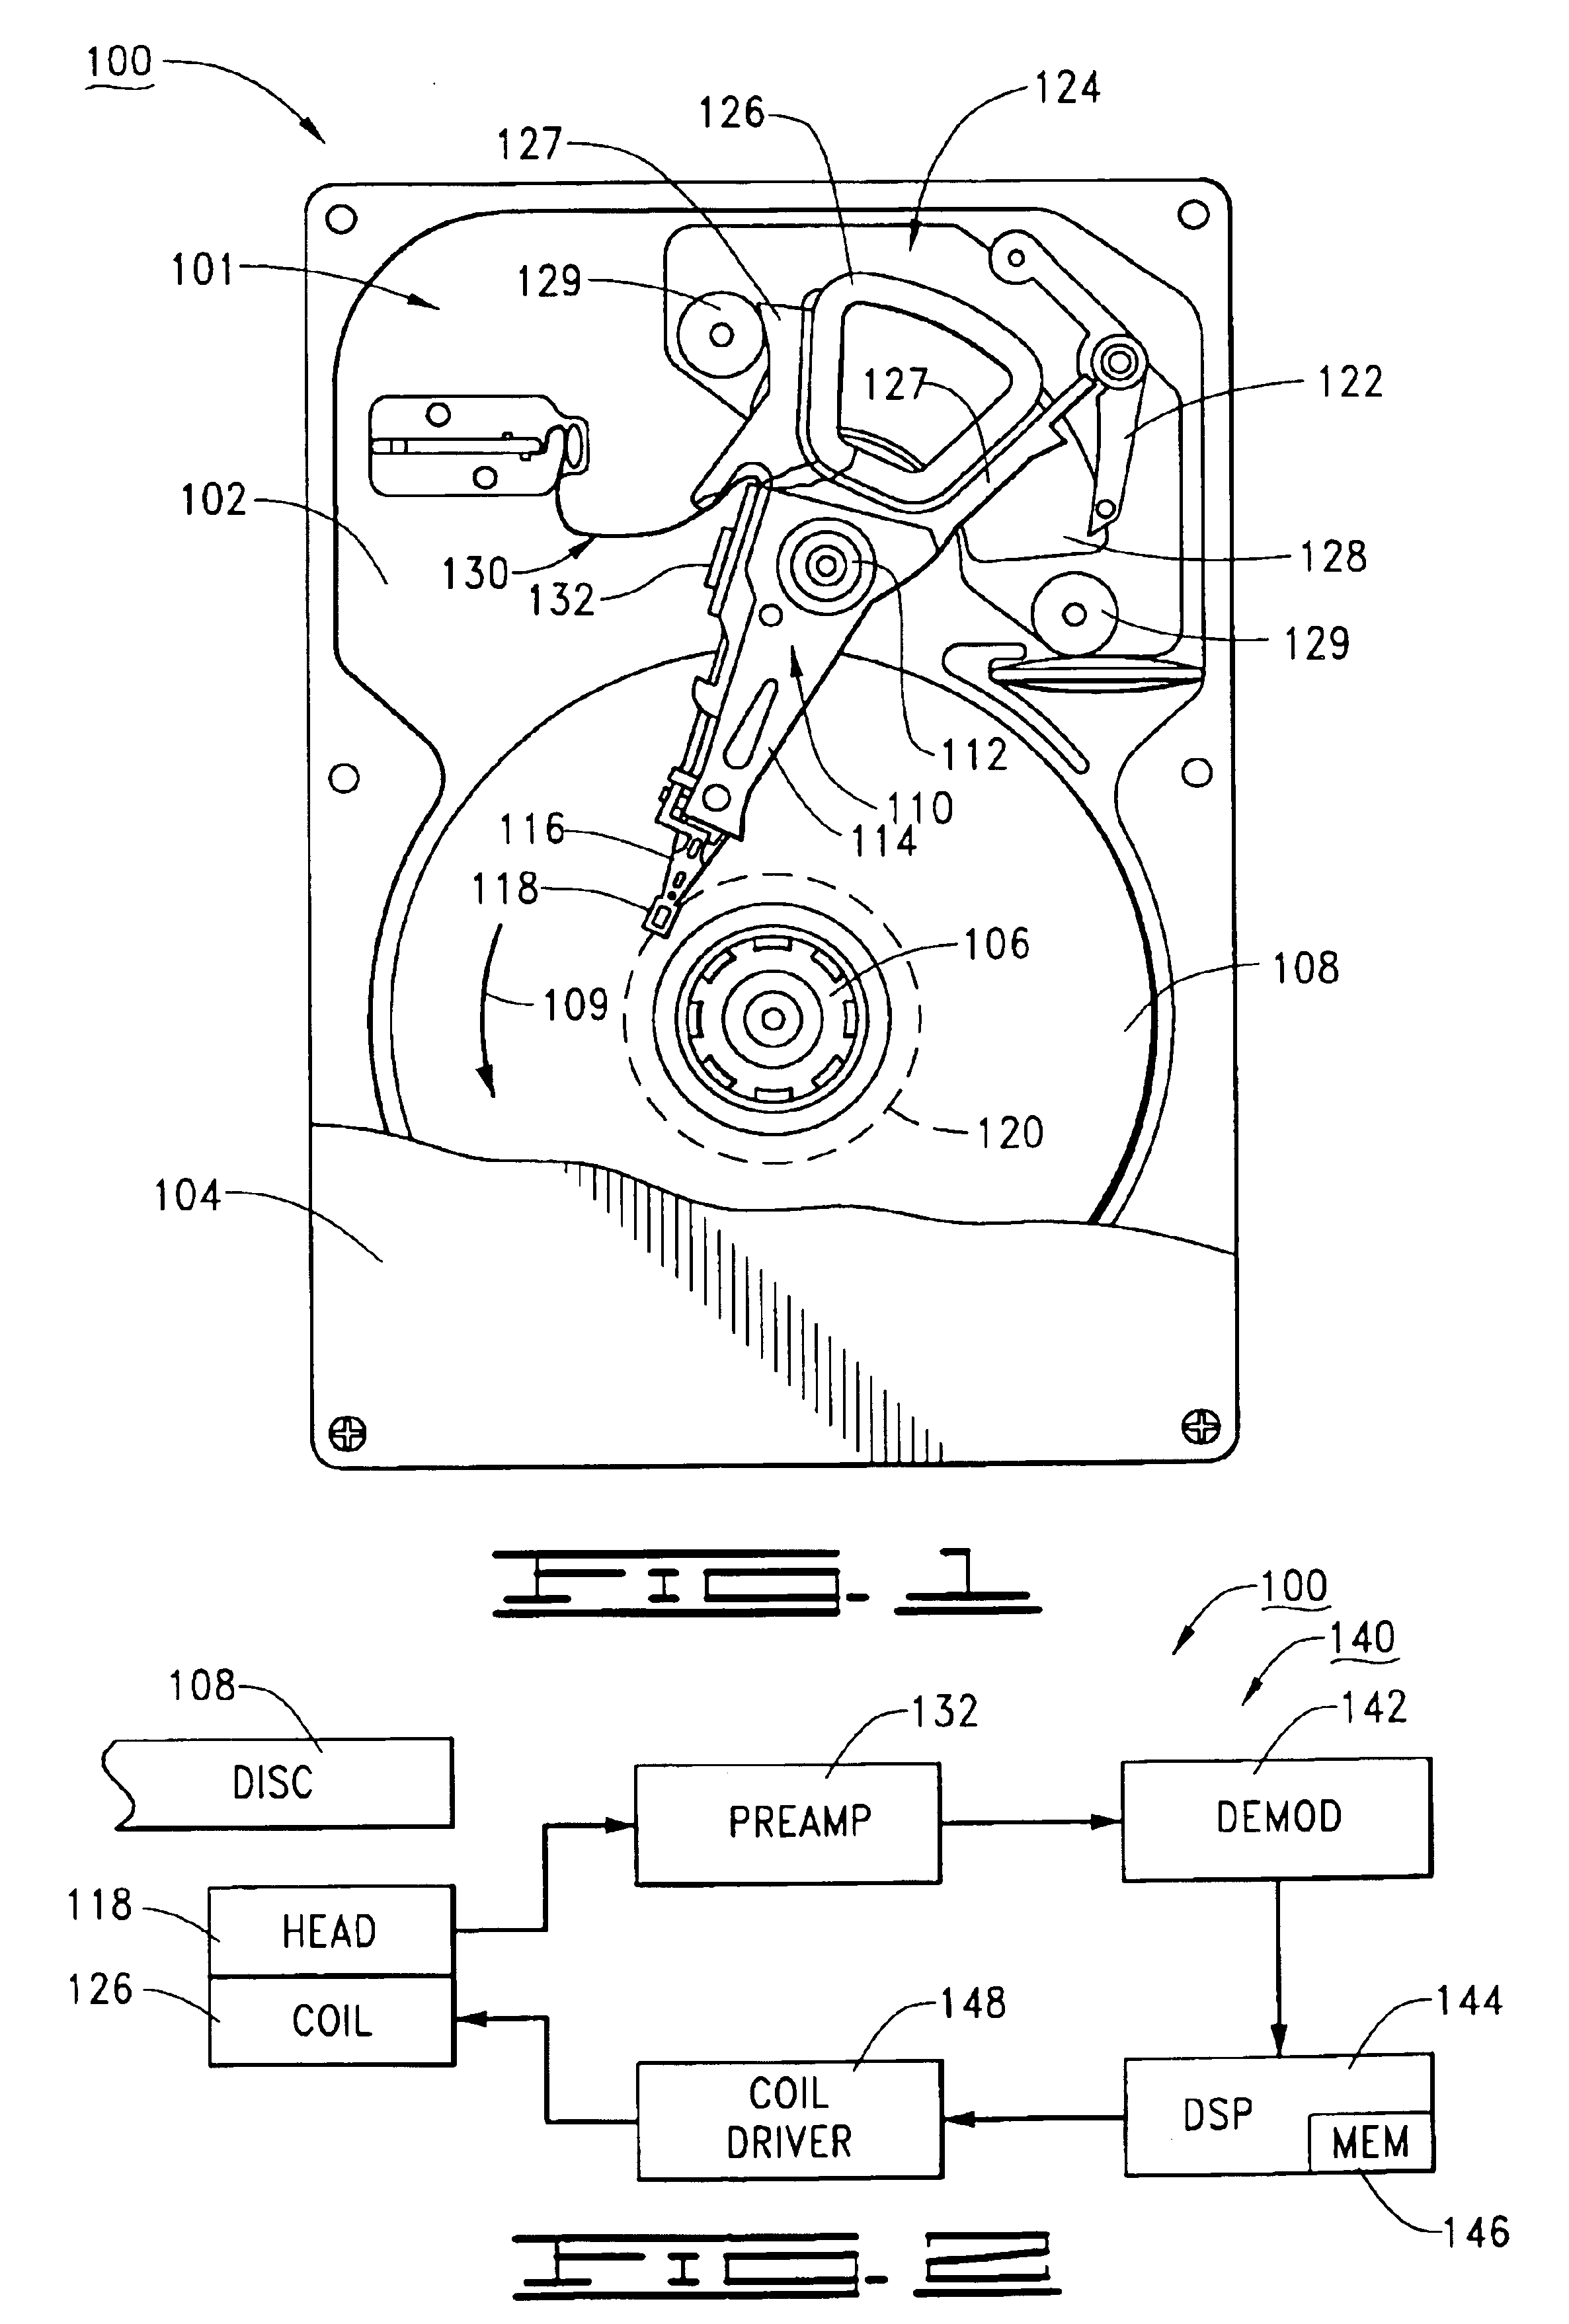 Reducing actuator arm oscillation during settle mode in a disc drive servo system